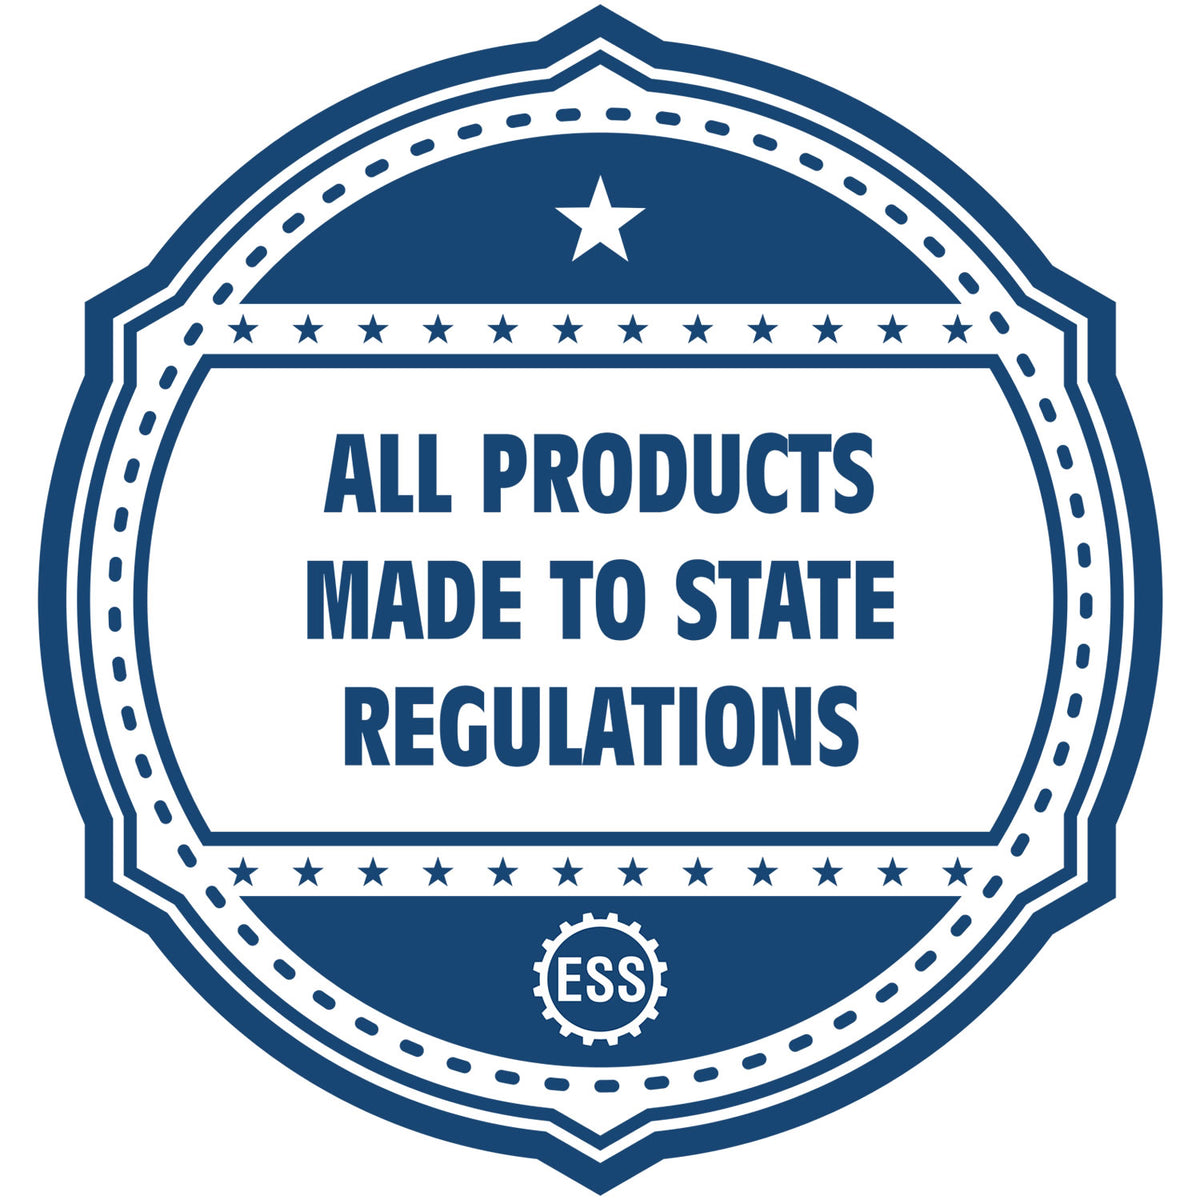 An icon or badge element for the Alabama Landscape Architectural Seal Stamp showing that this product is made in compliance with state regulations.